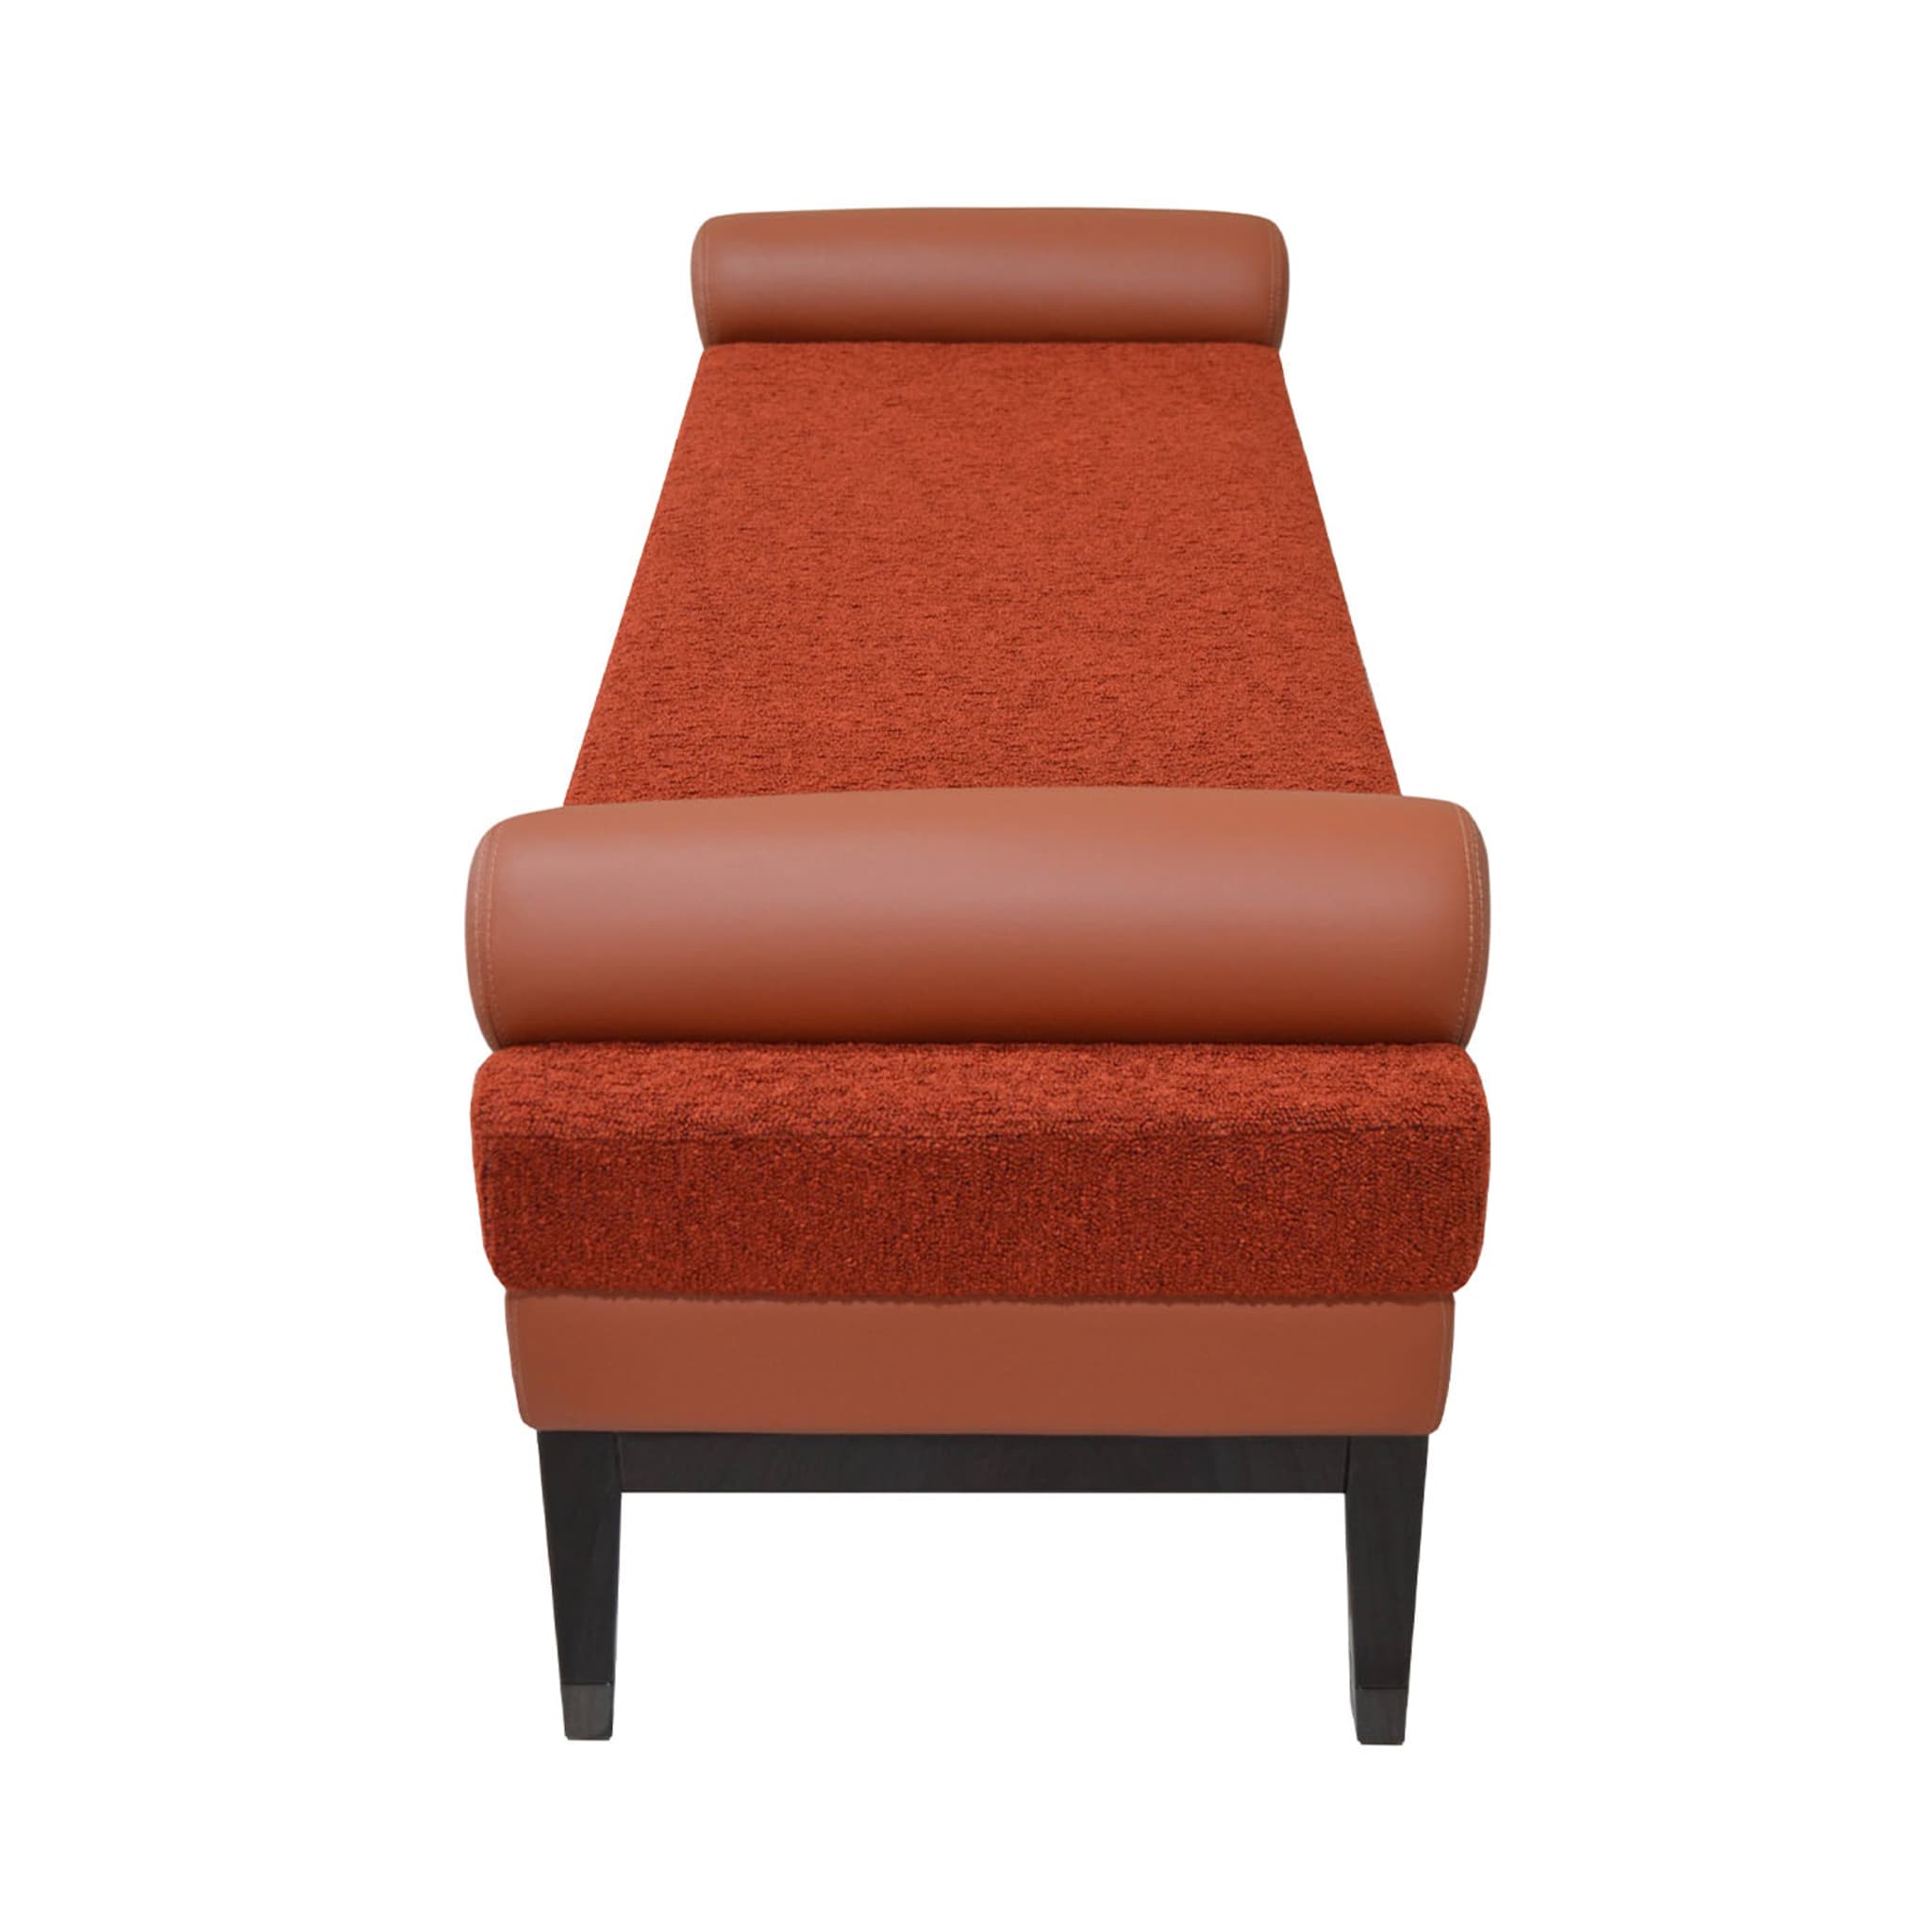 Italian Contemporary Upholstered Bench In Terracotta Fabric  - Alternative view 2